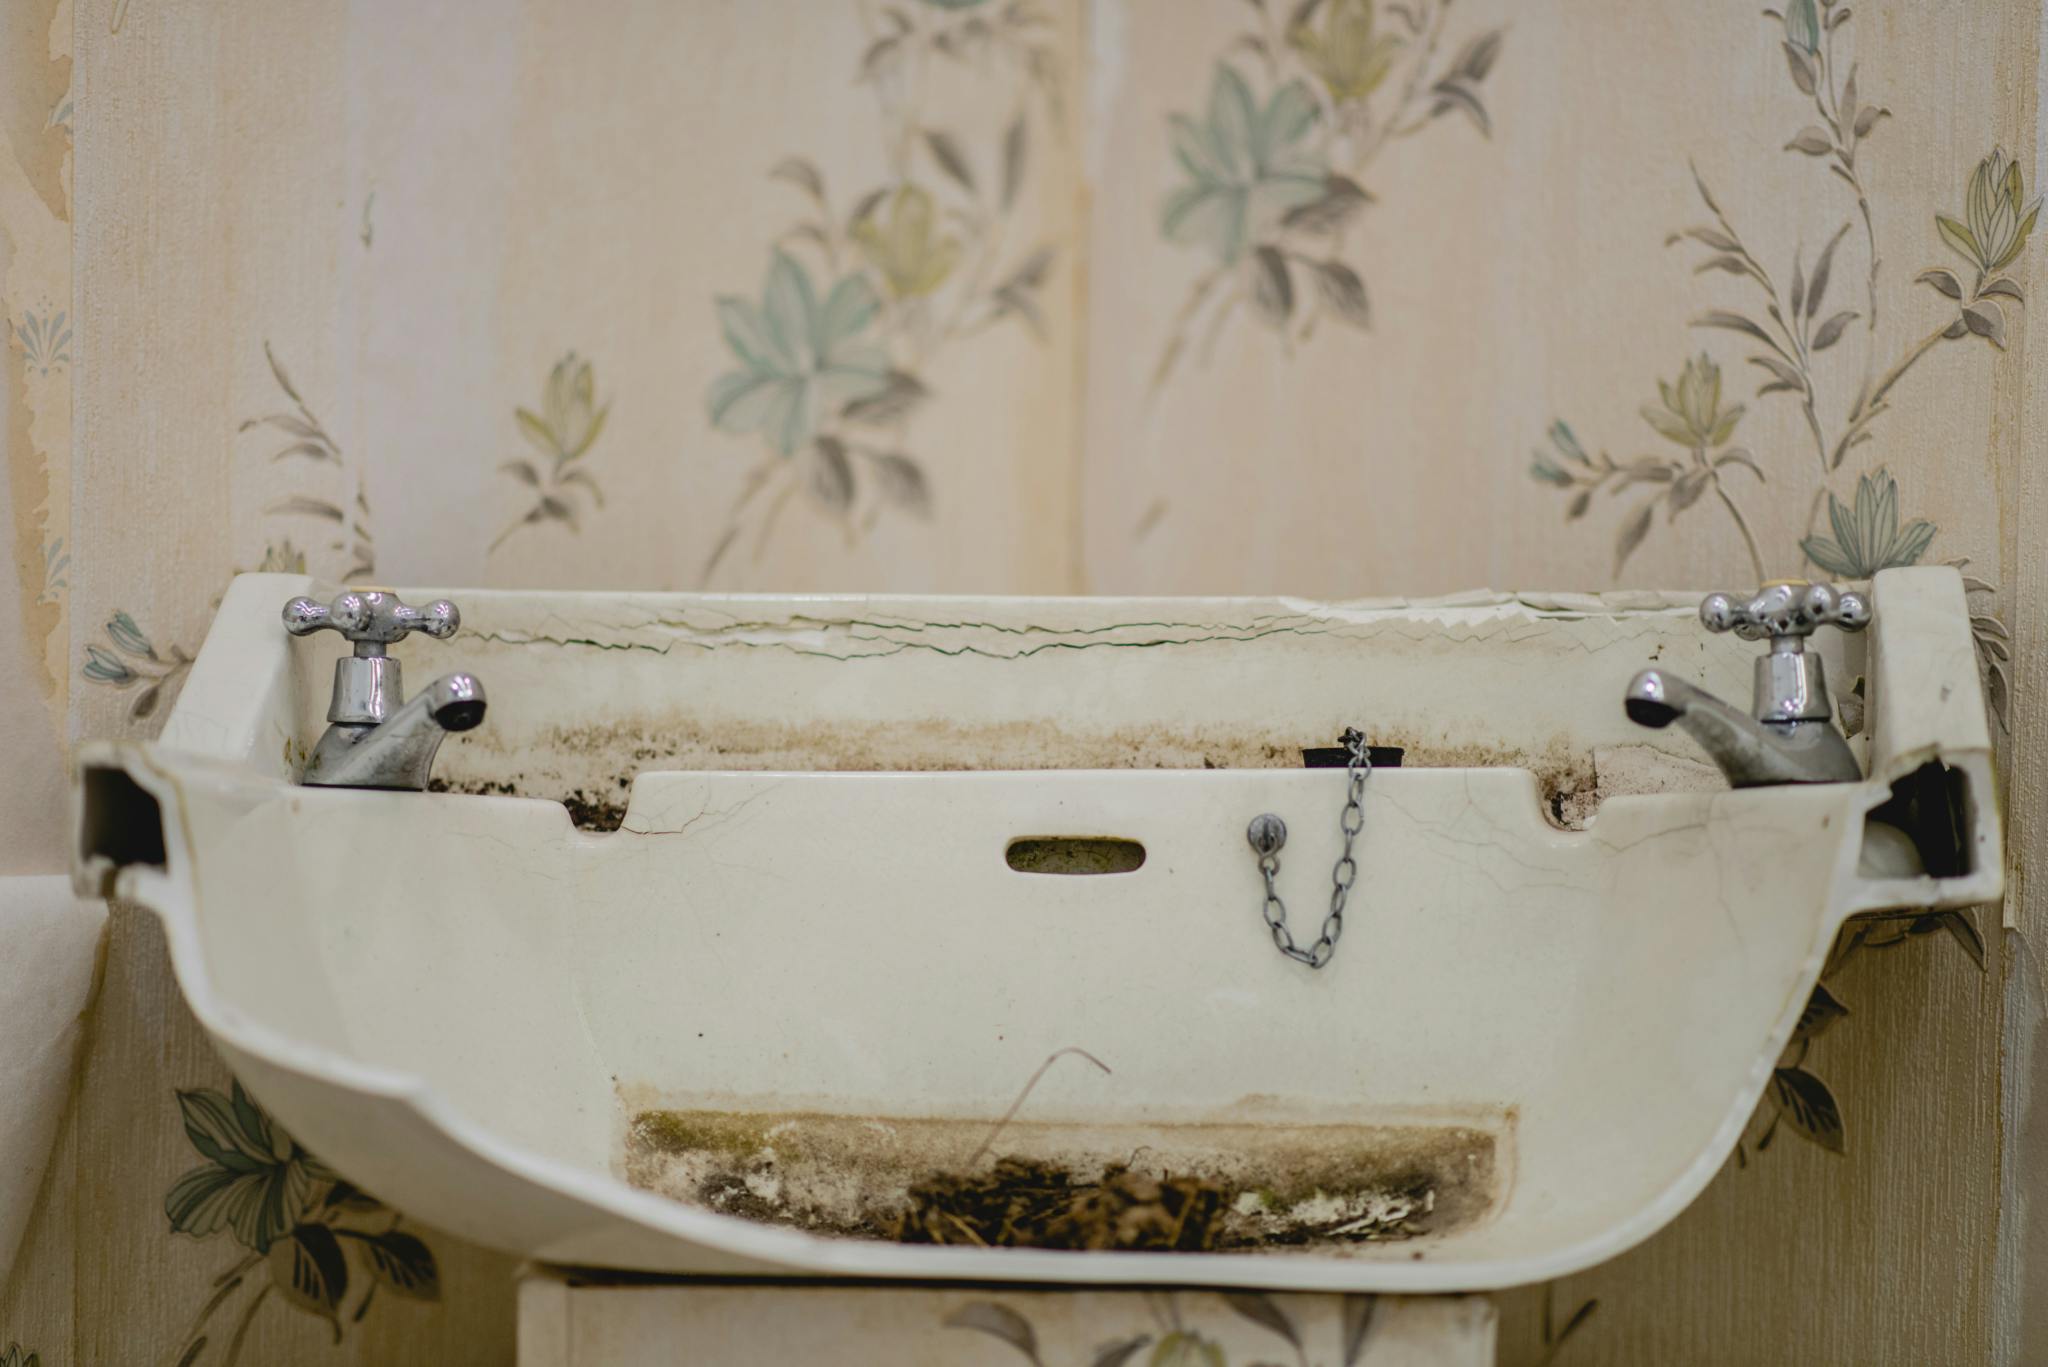 Image shows a broken ceramic sink which is dirty and rusted